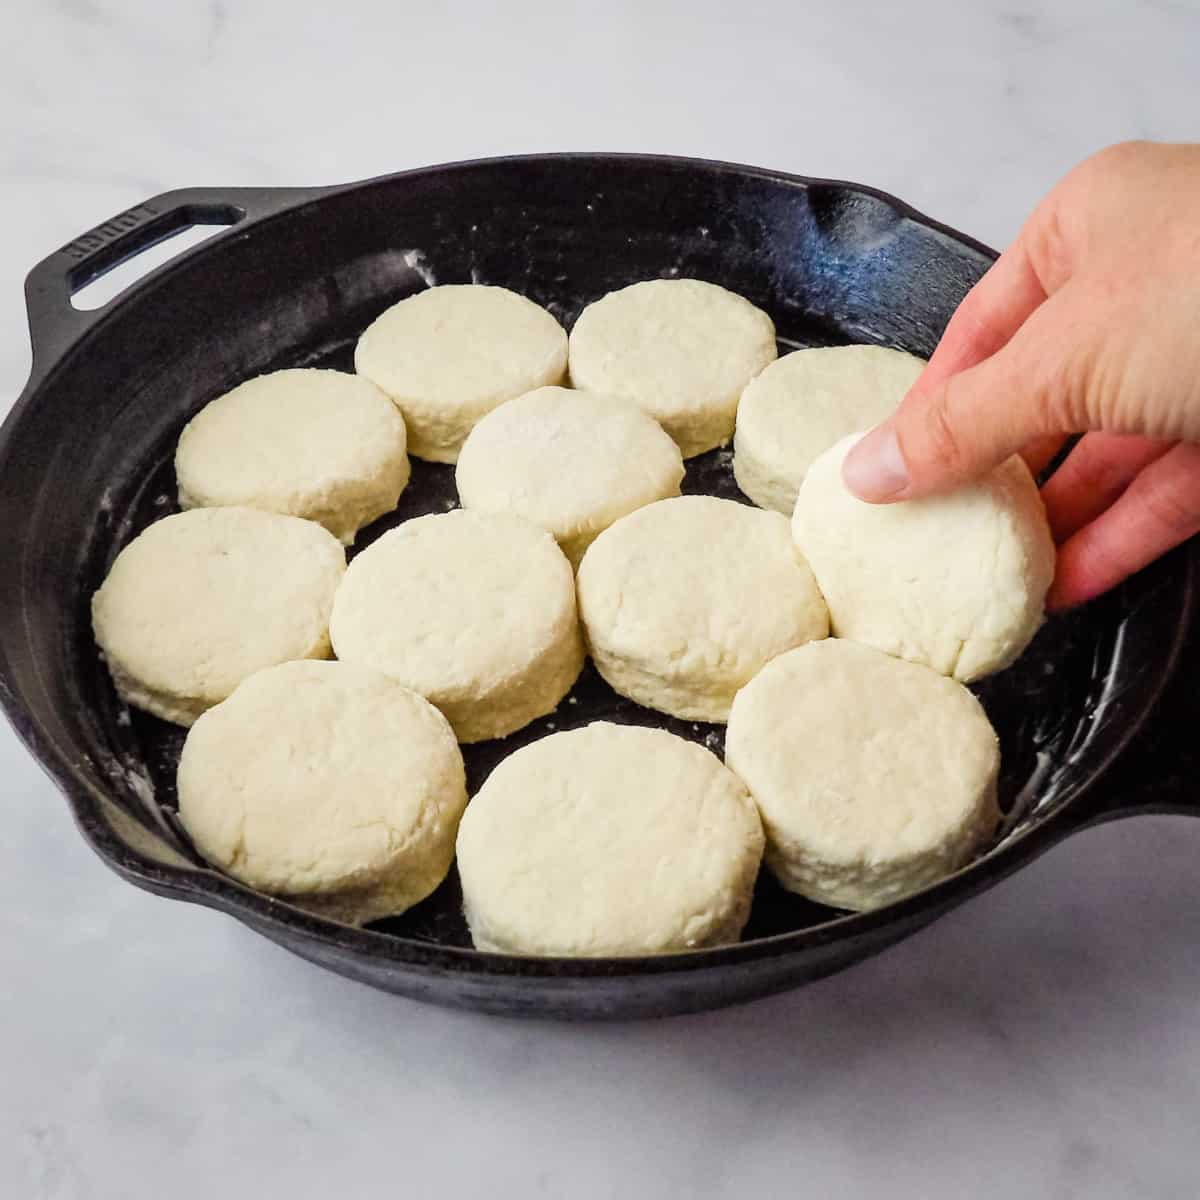 Homemade buttermilk biscuits being laid in a cast-iron skillet to bake.